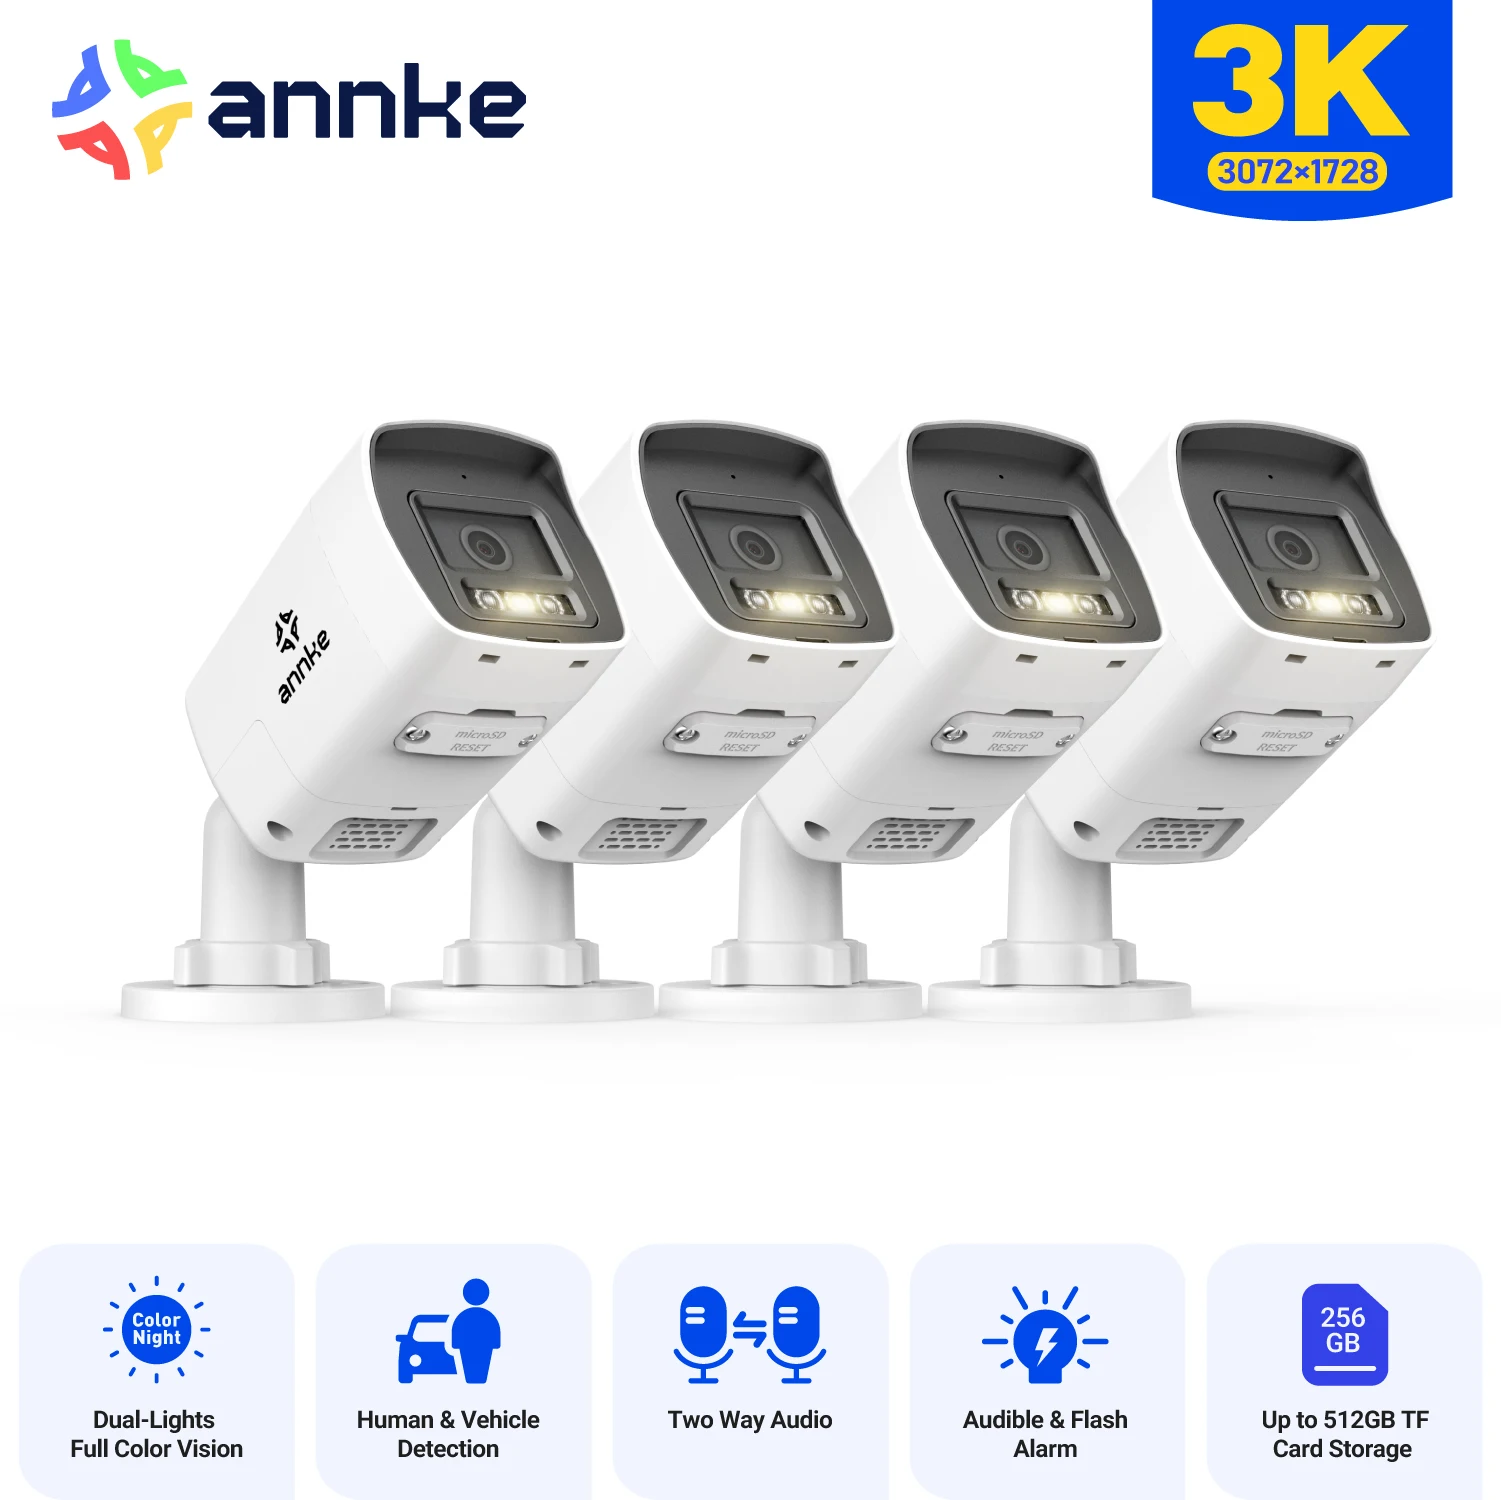 

Annke H.265+ 3K Dual Light Audio Fixed Camera Human Vehicle Detection 6MP HD IP Security Camera Poe Two-way Audio 2.8MM Lens